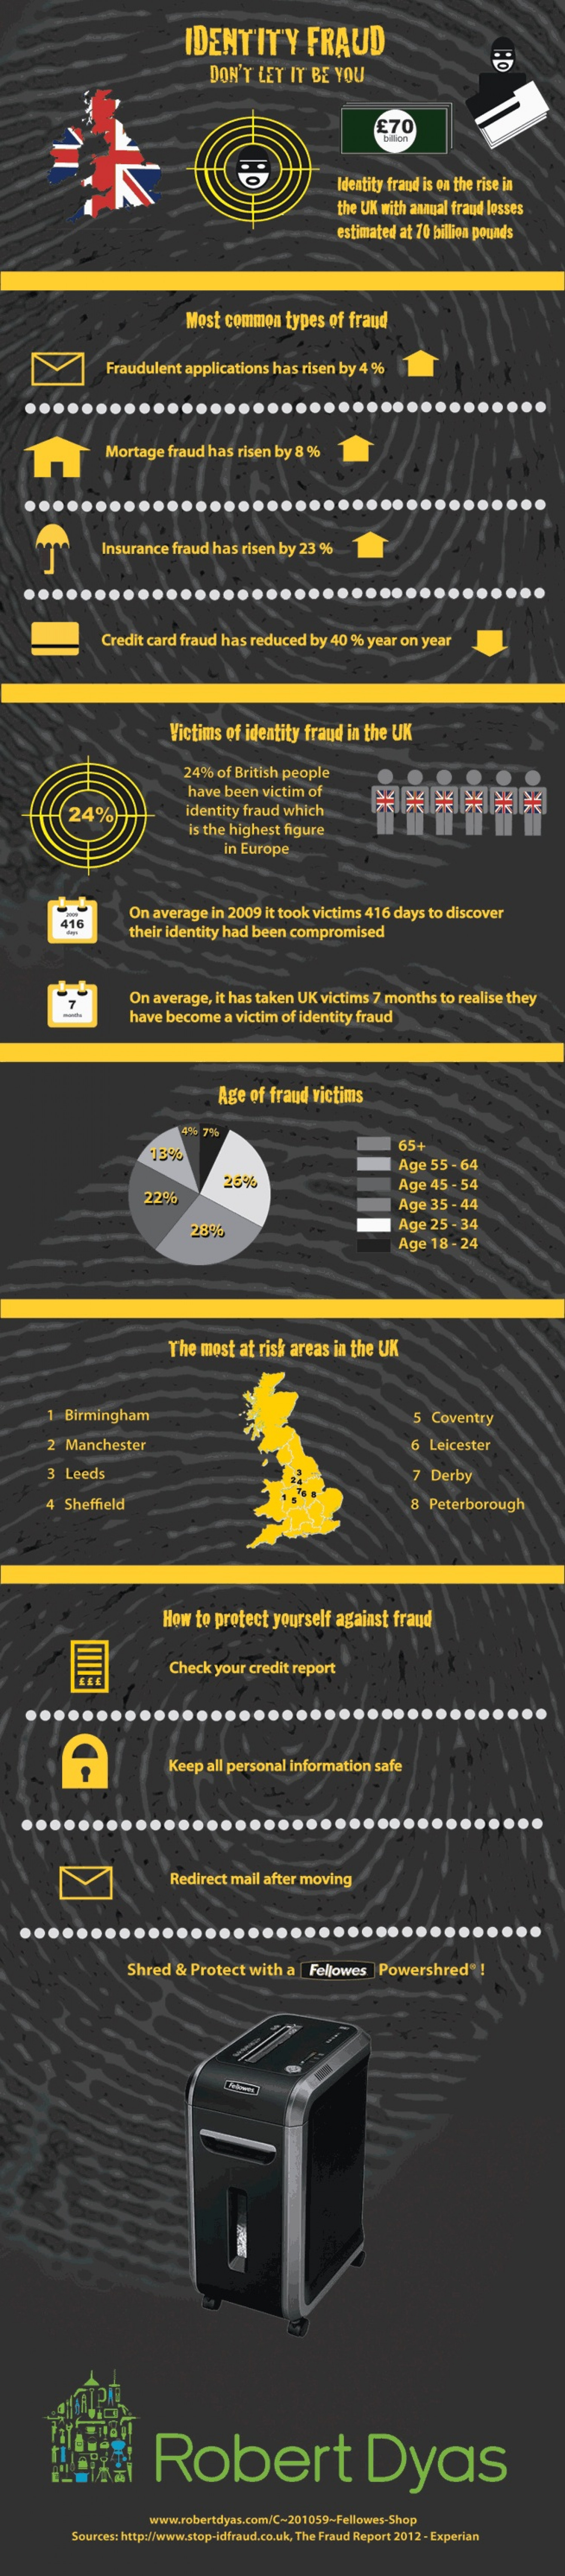 Identity Fraud - Don't Let It Be You Infographic